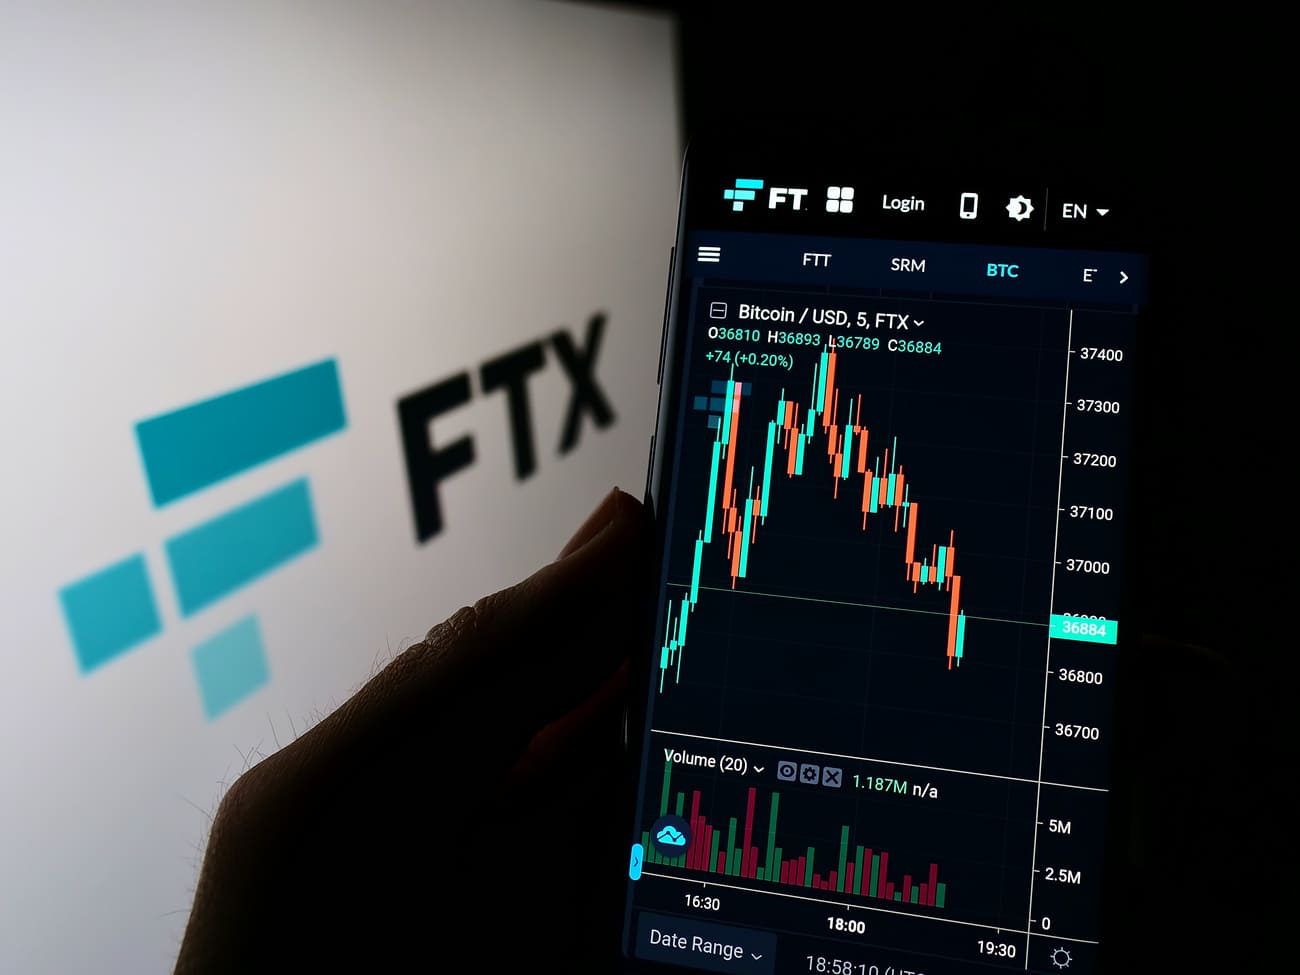 FTX files bankruptcy proceedings, CEO to exit